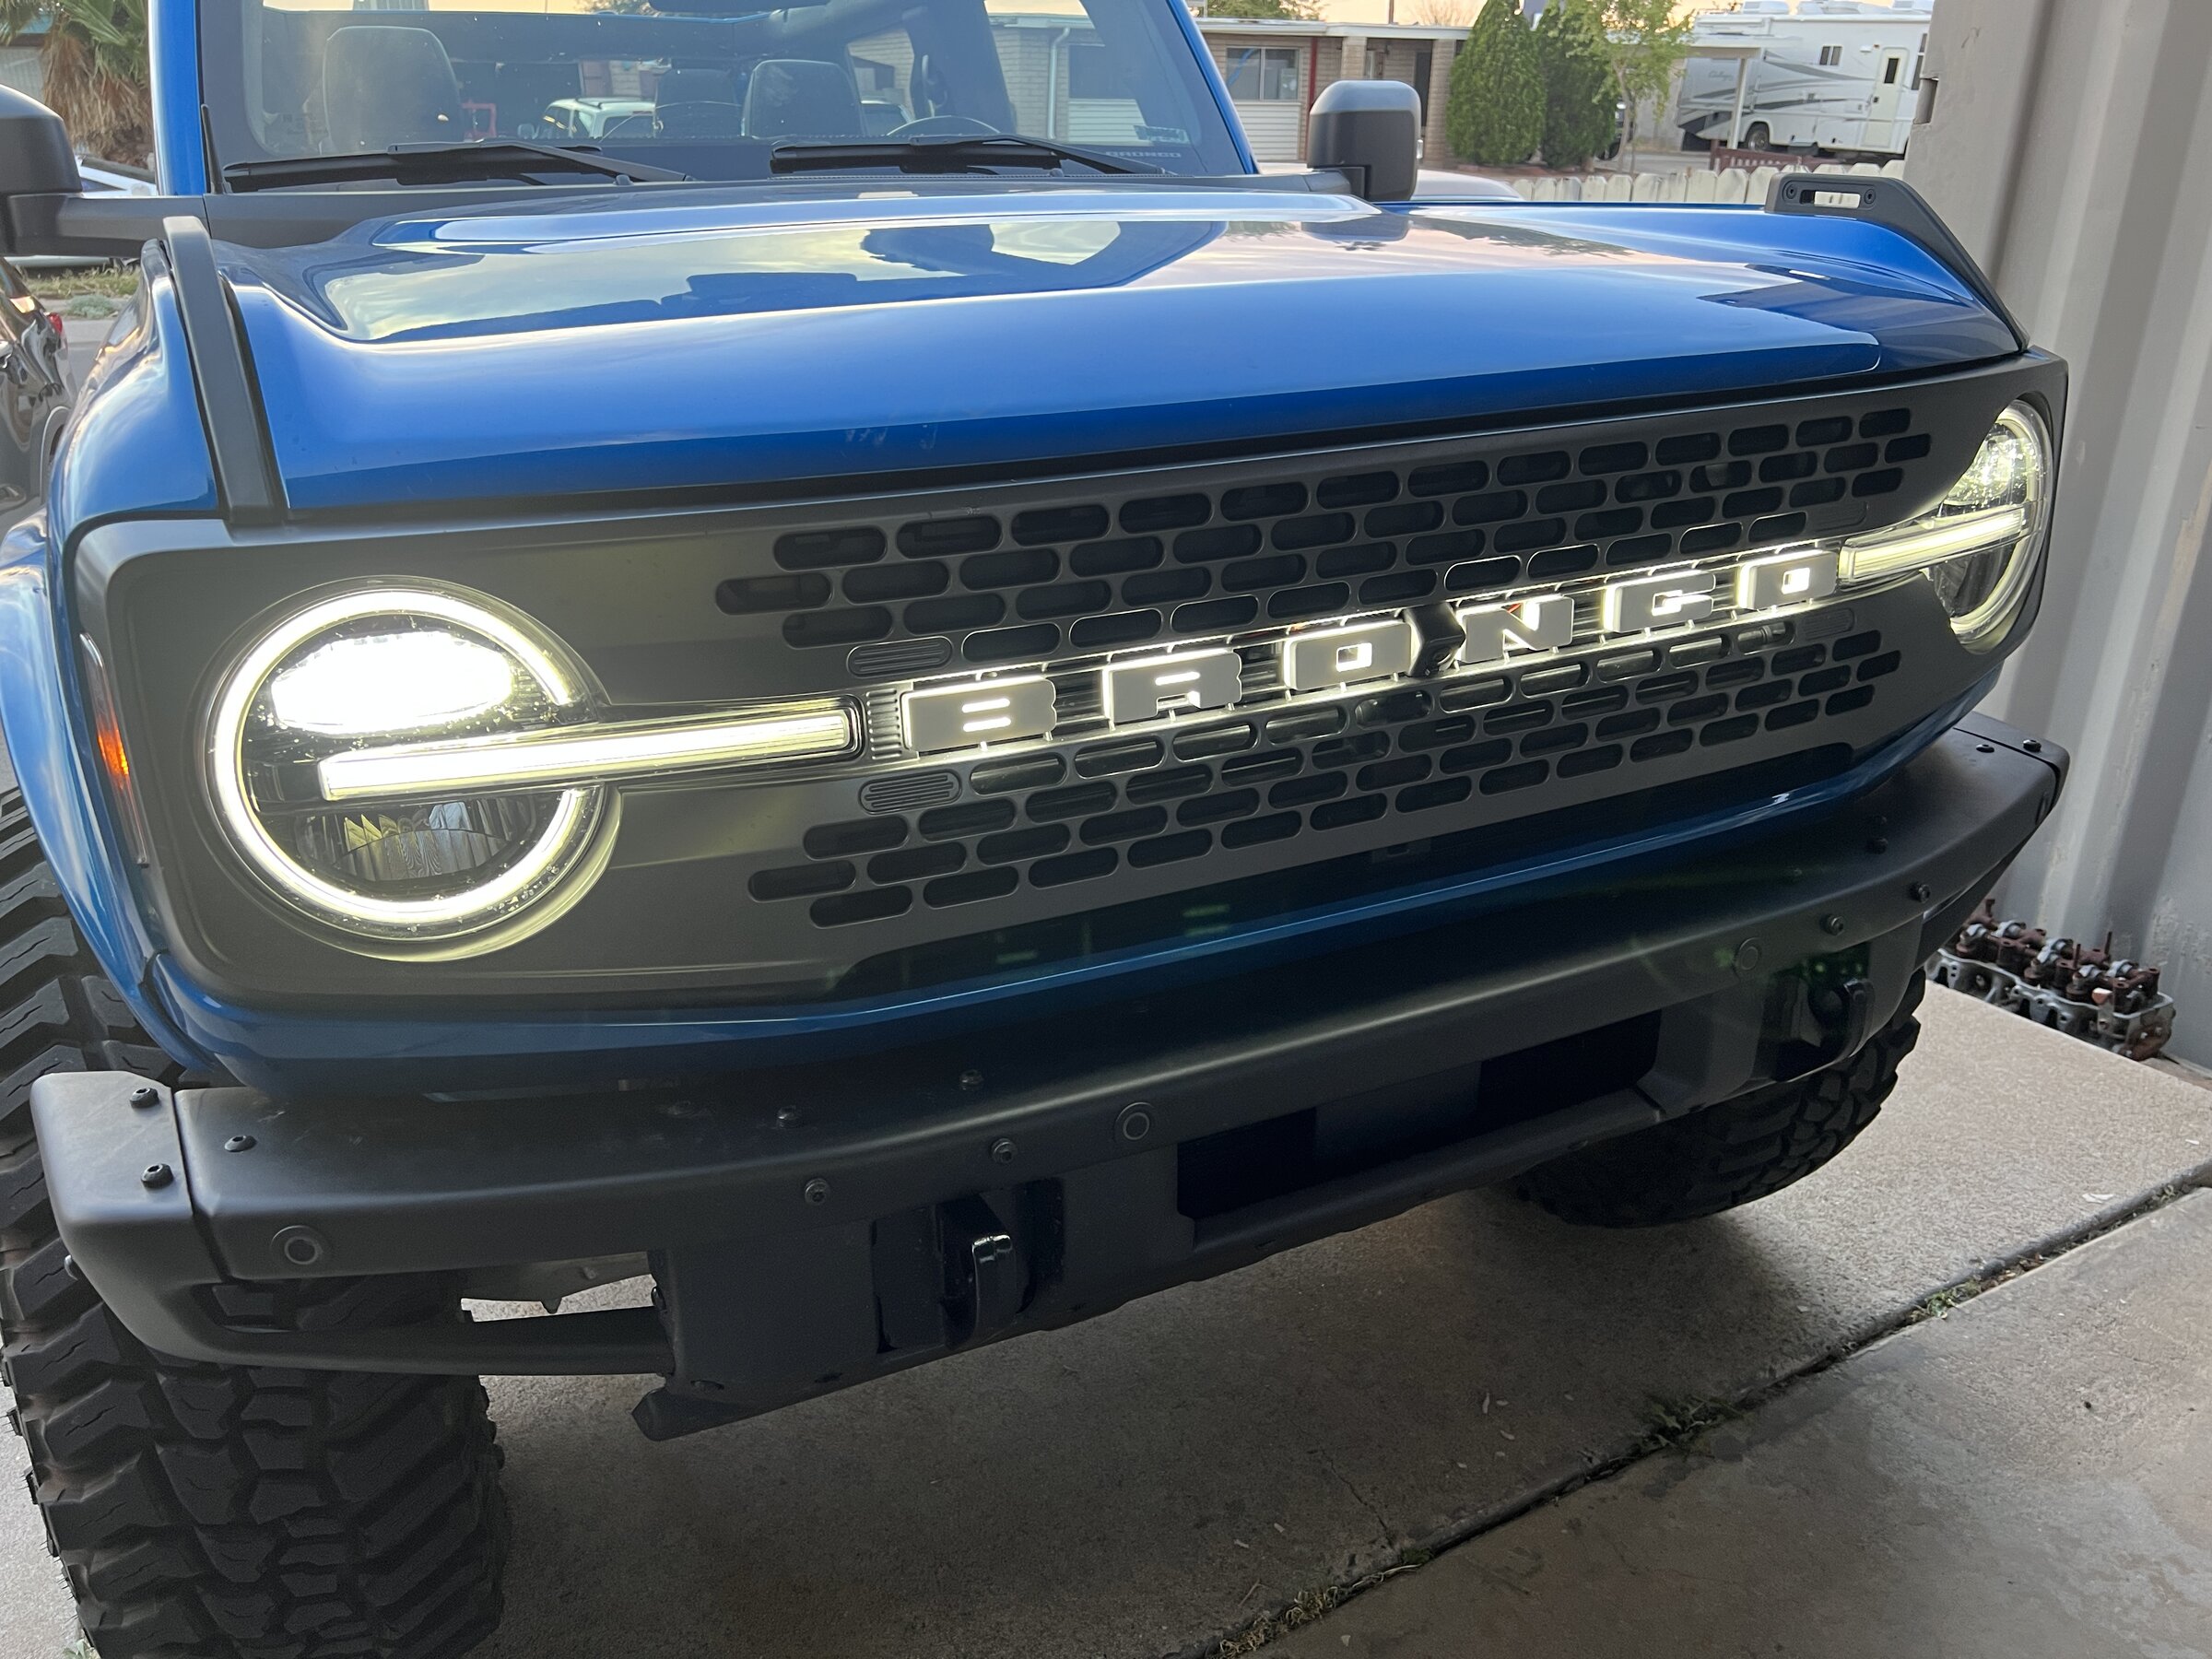 Ford Bronco NOW AVILABLE: : ORACLE Lighting: UNIVERSAL ILLUMINATED LED LETTERS 7F65E595-5056-49D1-89CE-A427467E0BF5